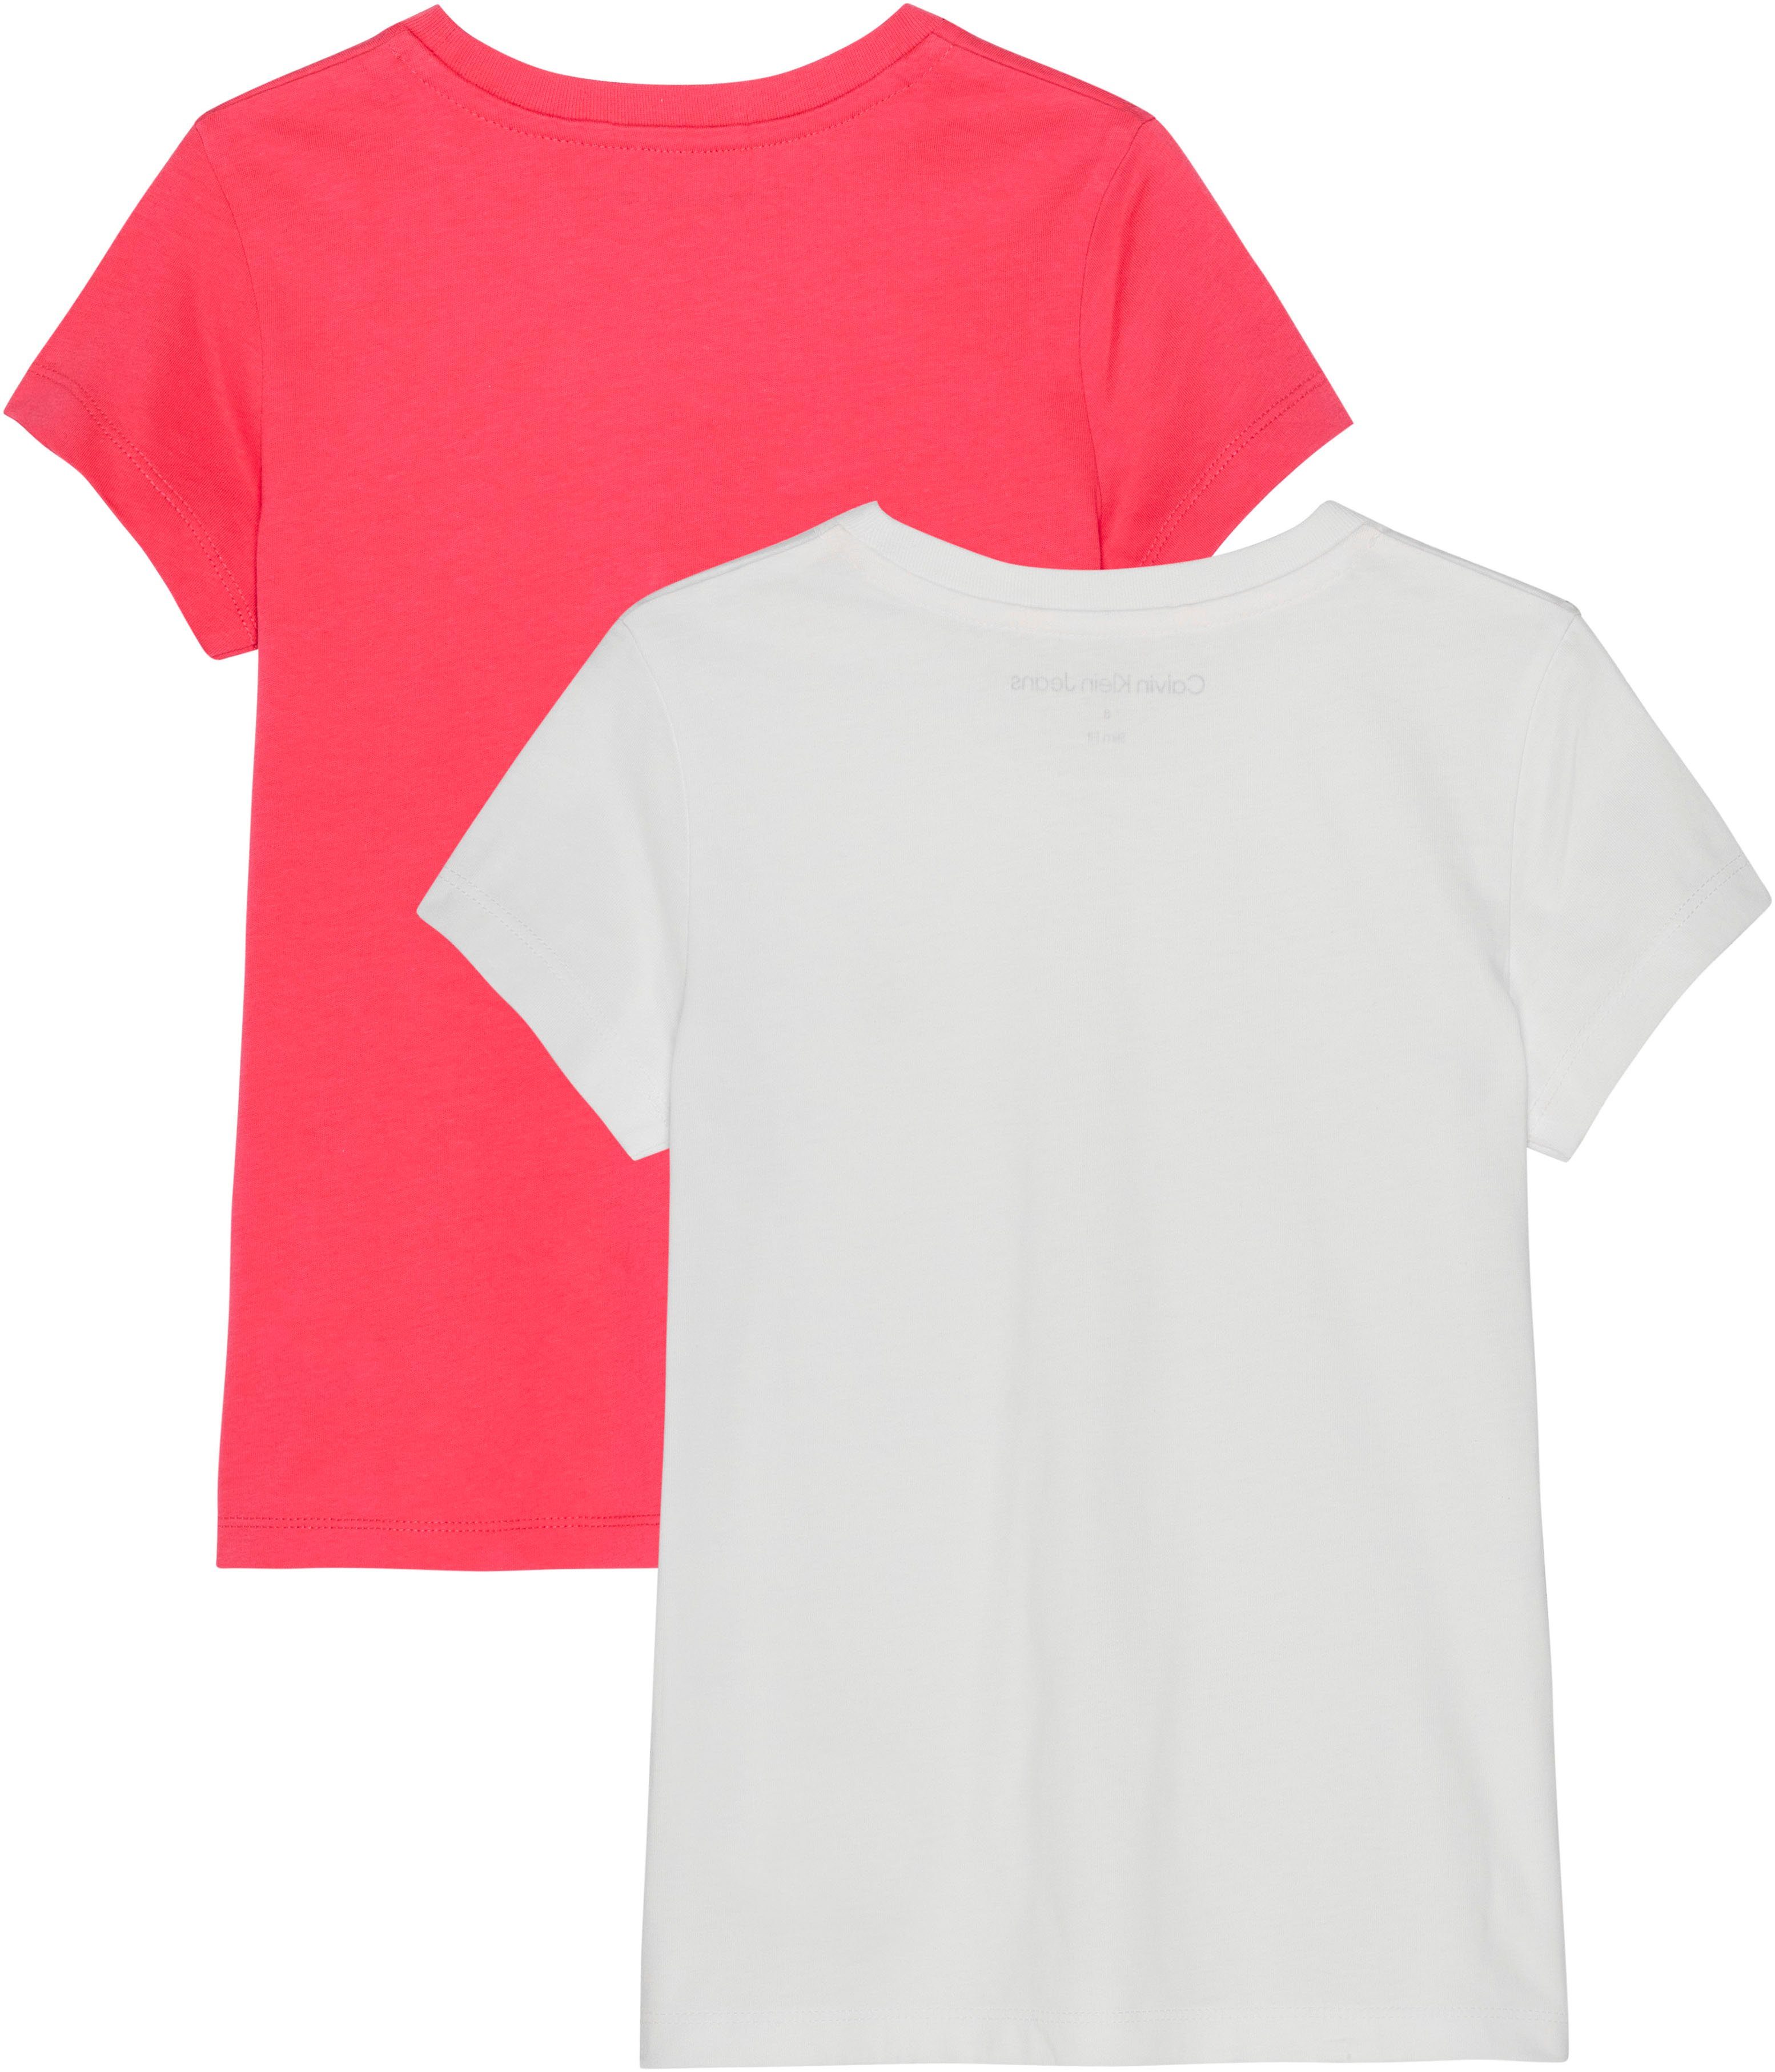 Calvin Klein Jeans 2-PACK 2-tlg) Teaberry SLIM T-Shirt MONOGRAM TOP (Packung, / Bright White